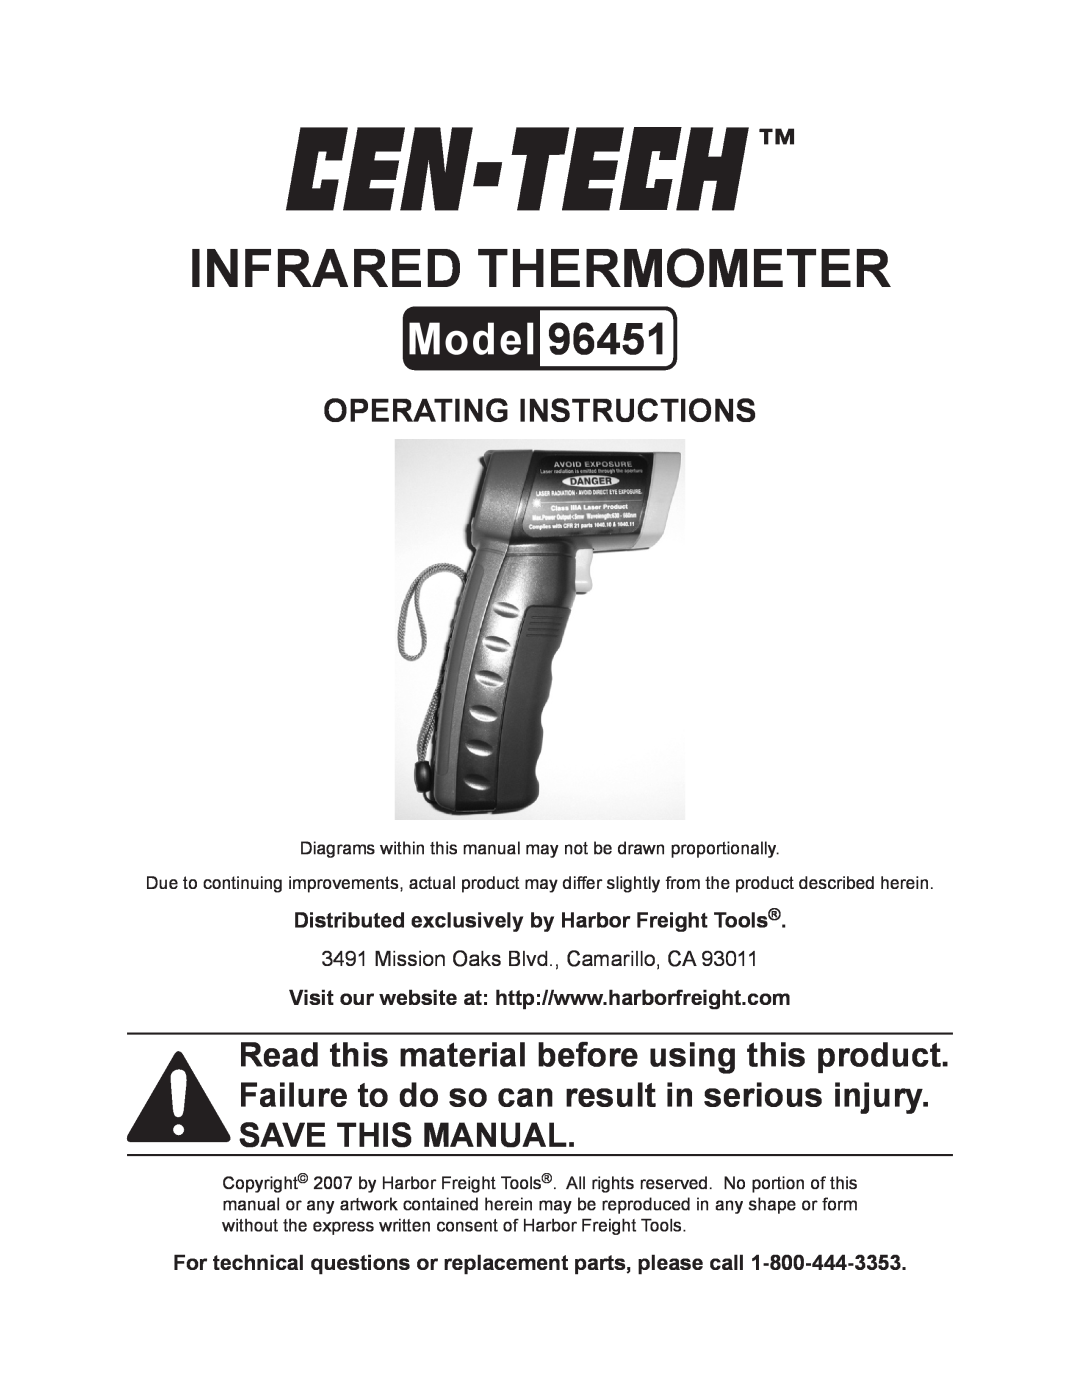 Harbor Freight Tools 96451 operating instructions Distributed exclusively by Harbor Freight Tools, Infrared thermometer 